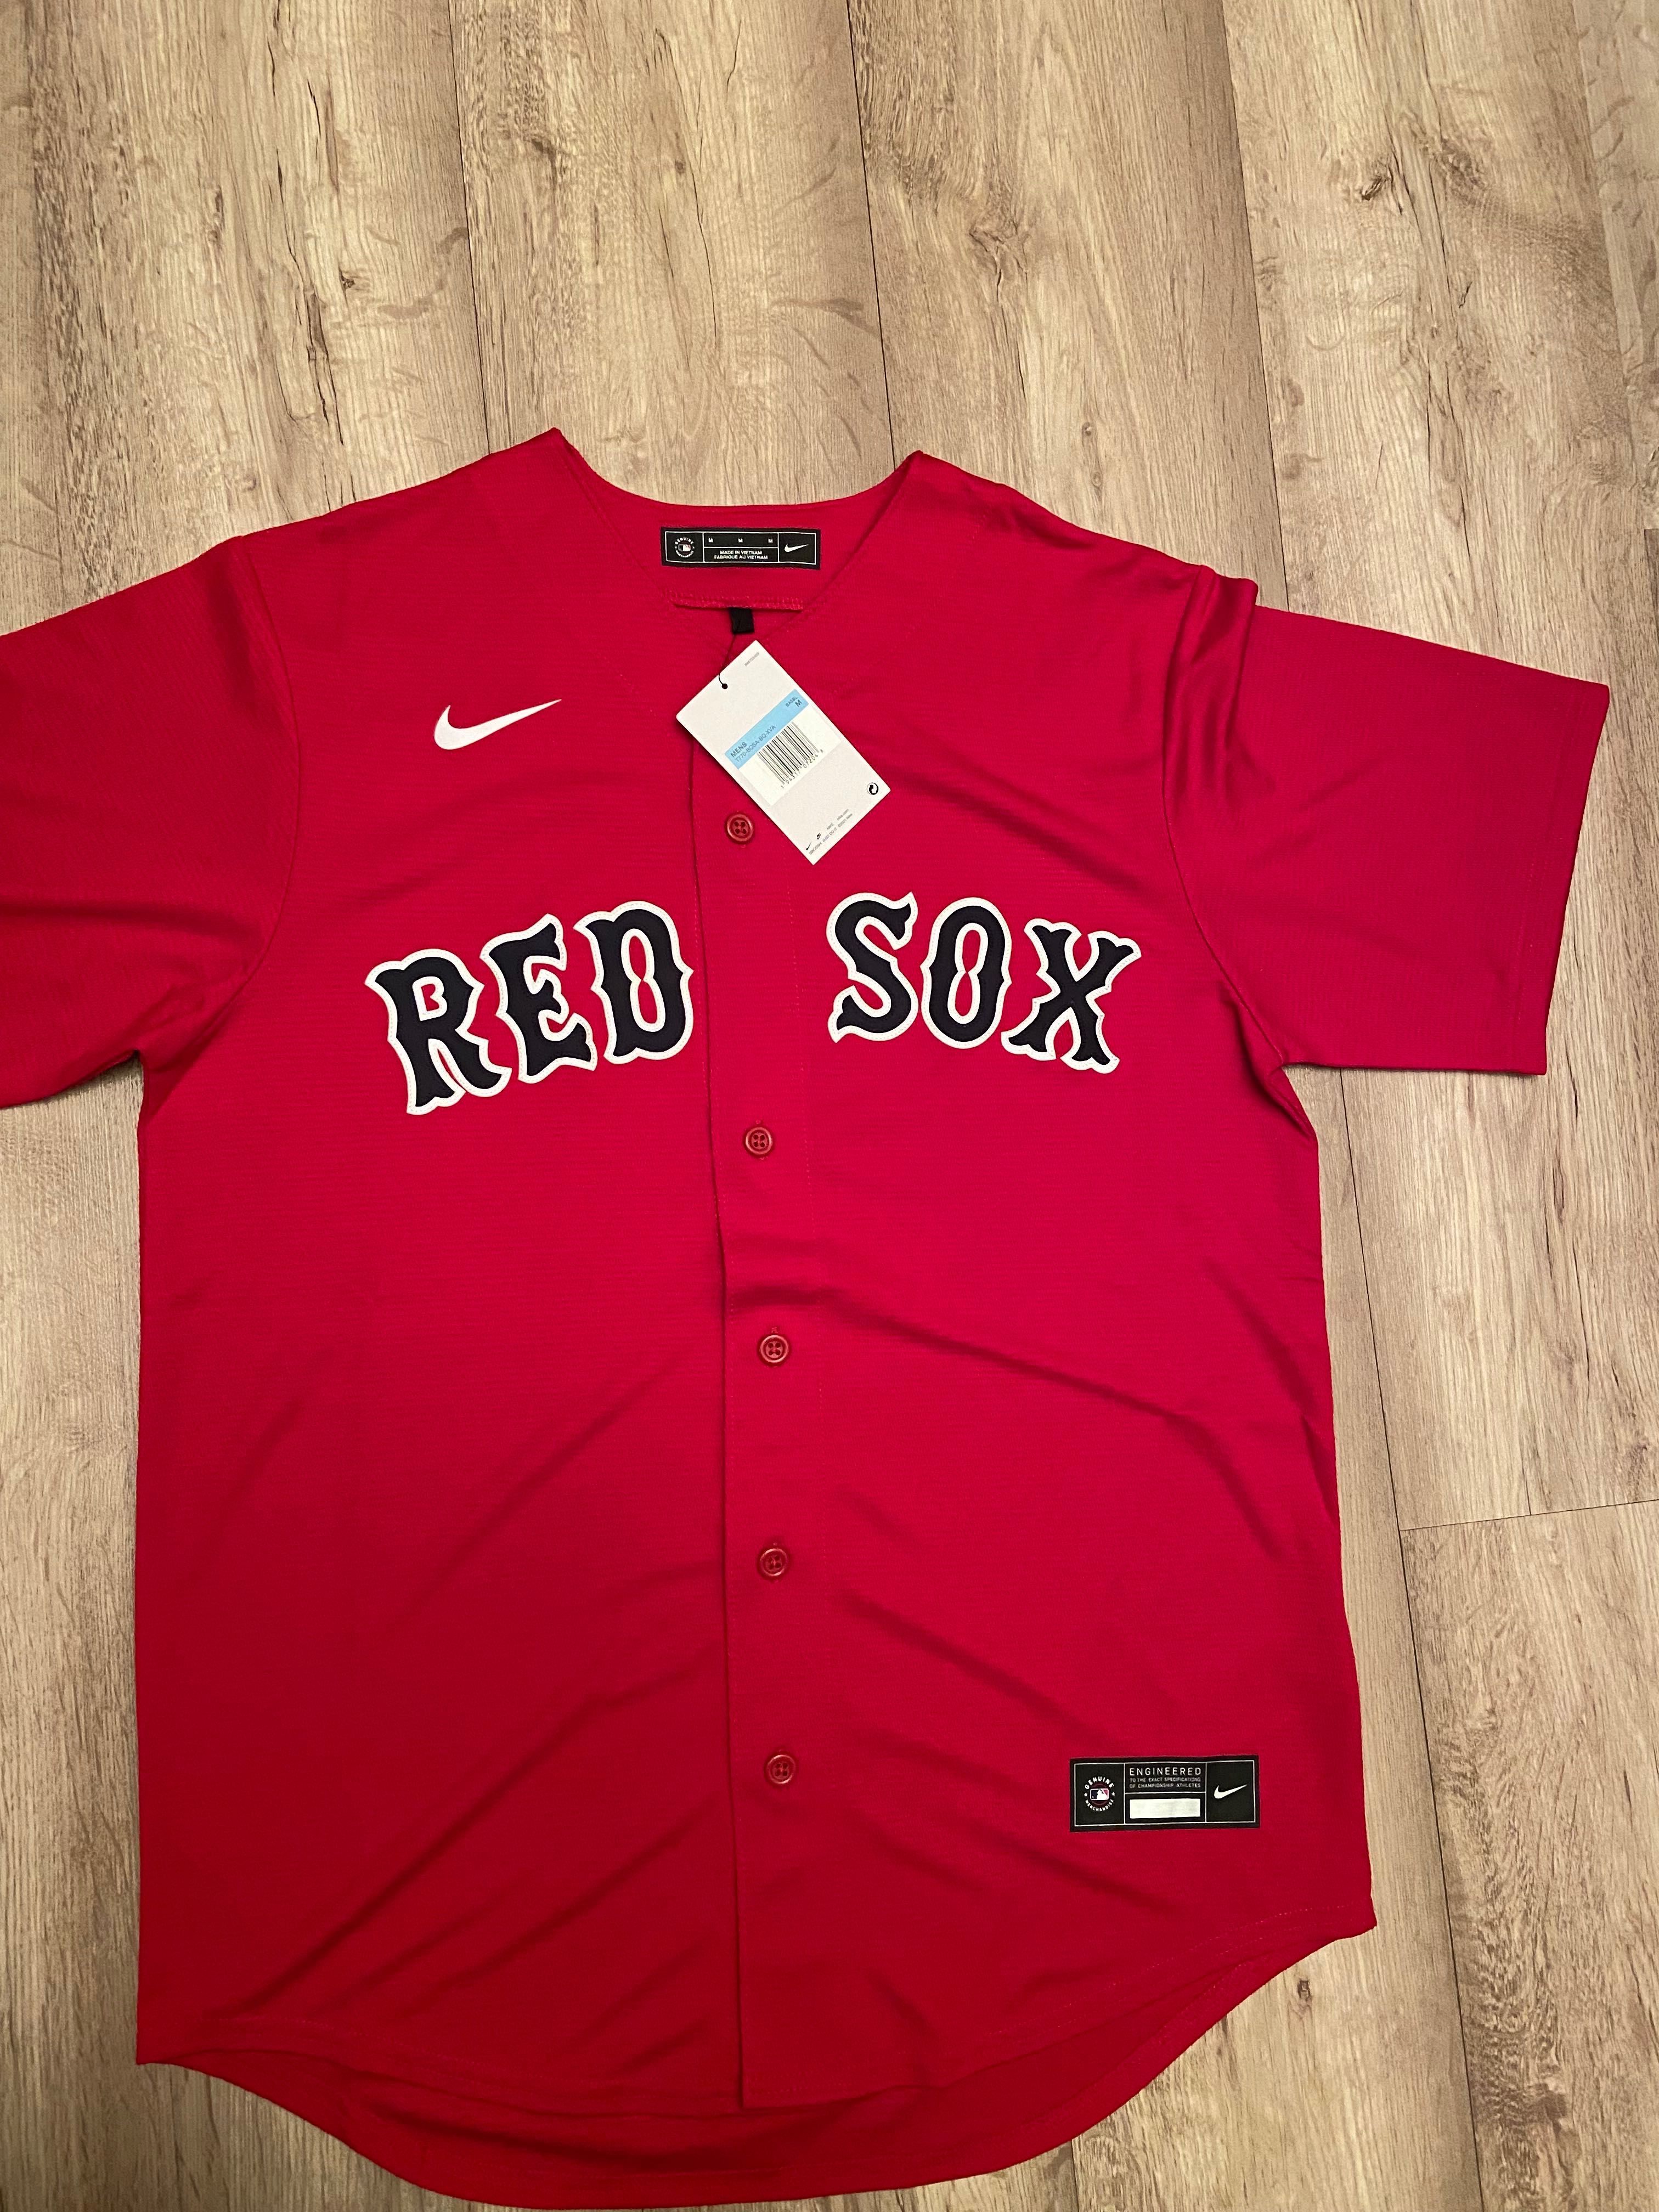 Boston Red Sox Nike Official Replica Alternate Jersey - Mens